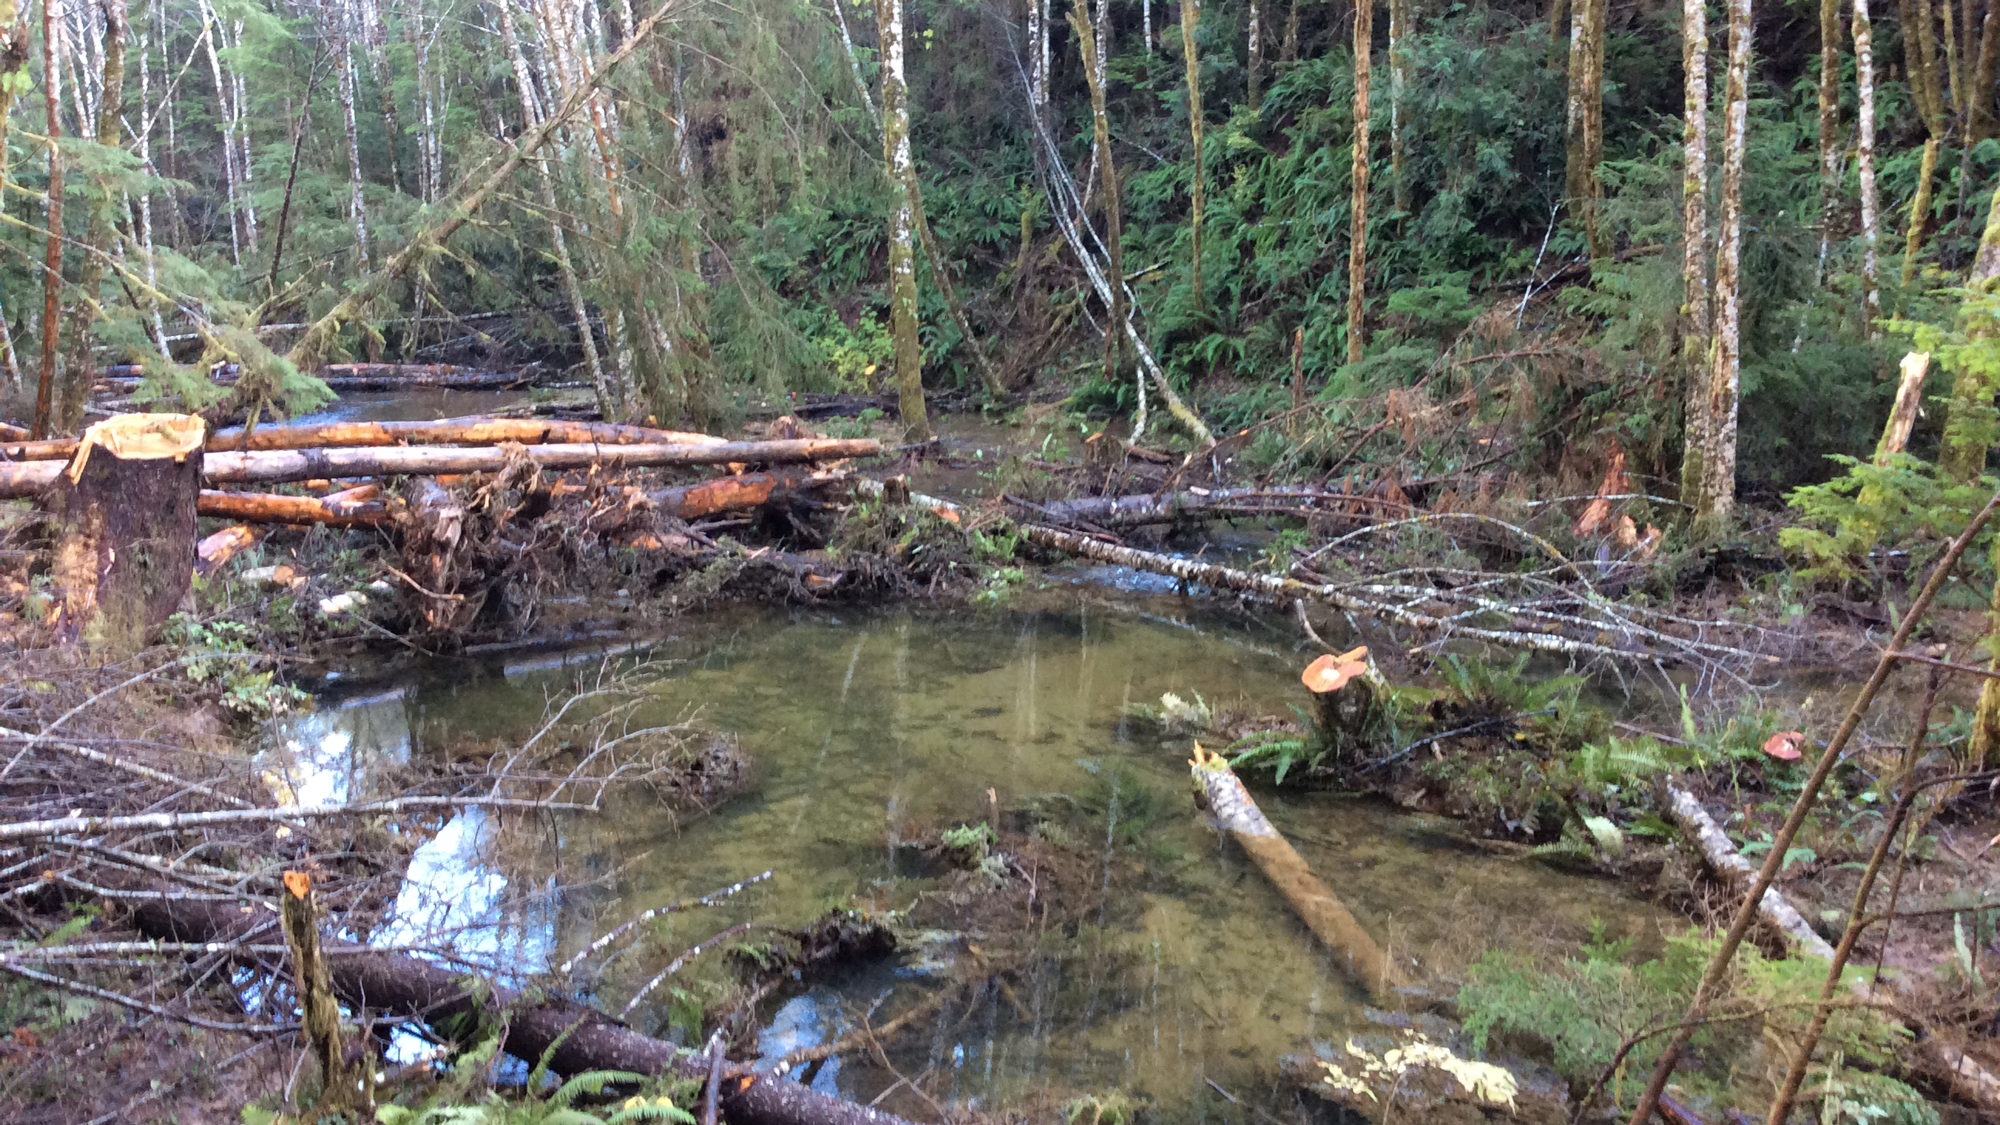 Large wood project in Ellsworth Creek Preserve. Photo © The Nature Conservancy (David Ryan)